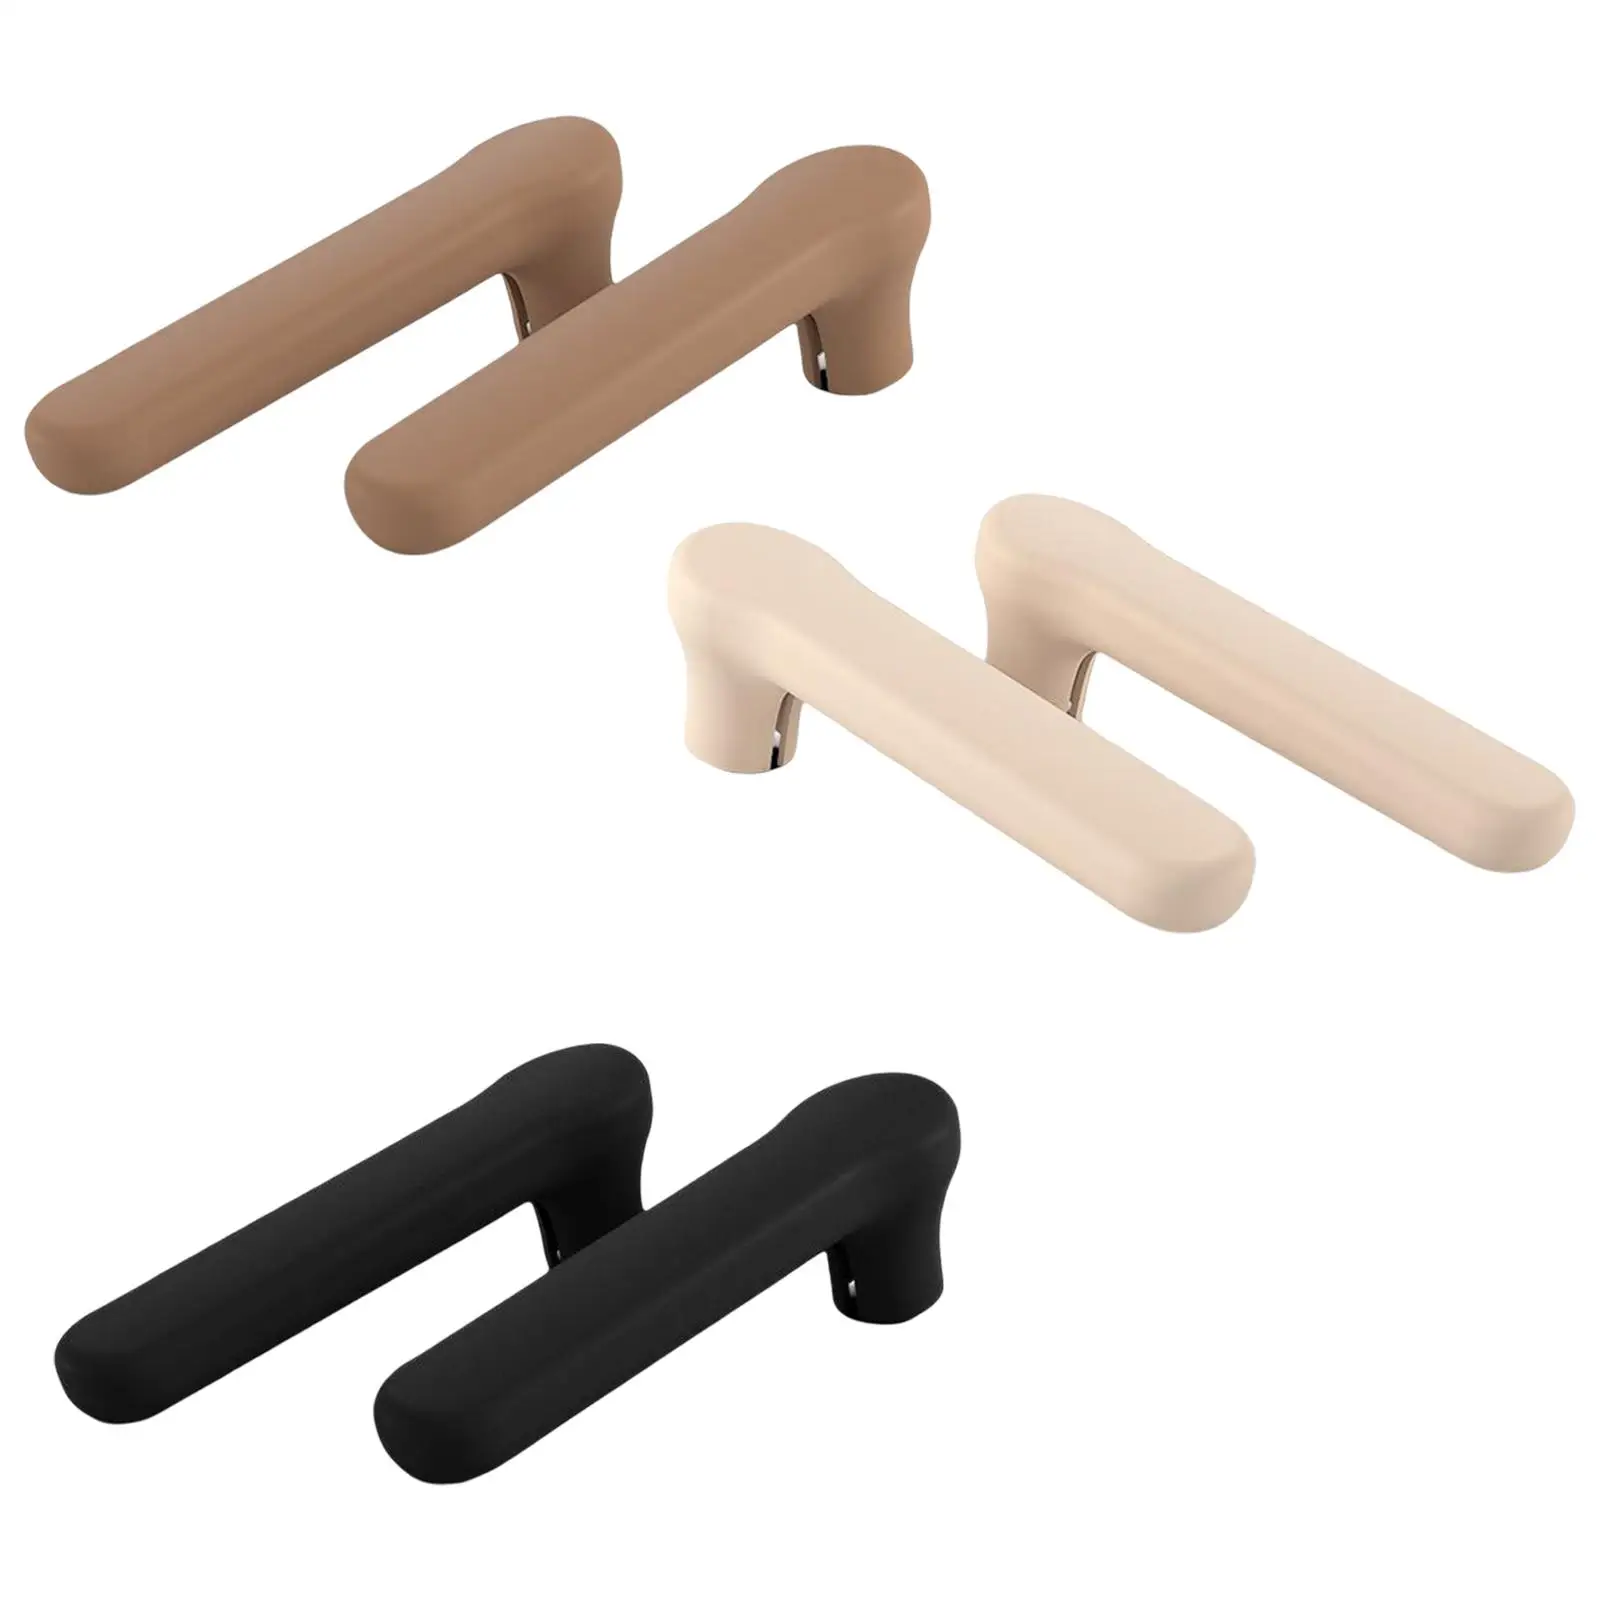 Door Handle Cover Silicone for Children Protection Noiseless Doorknob Cover